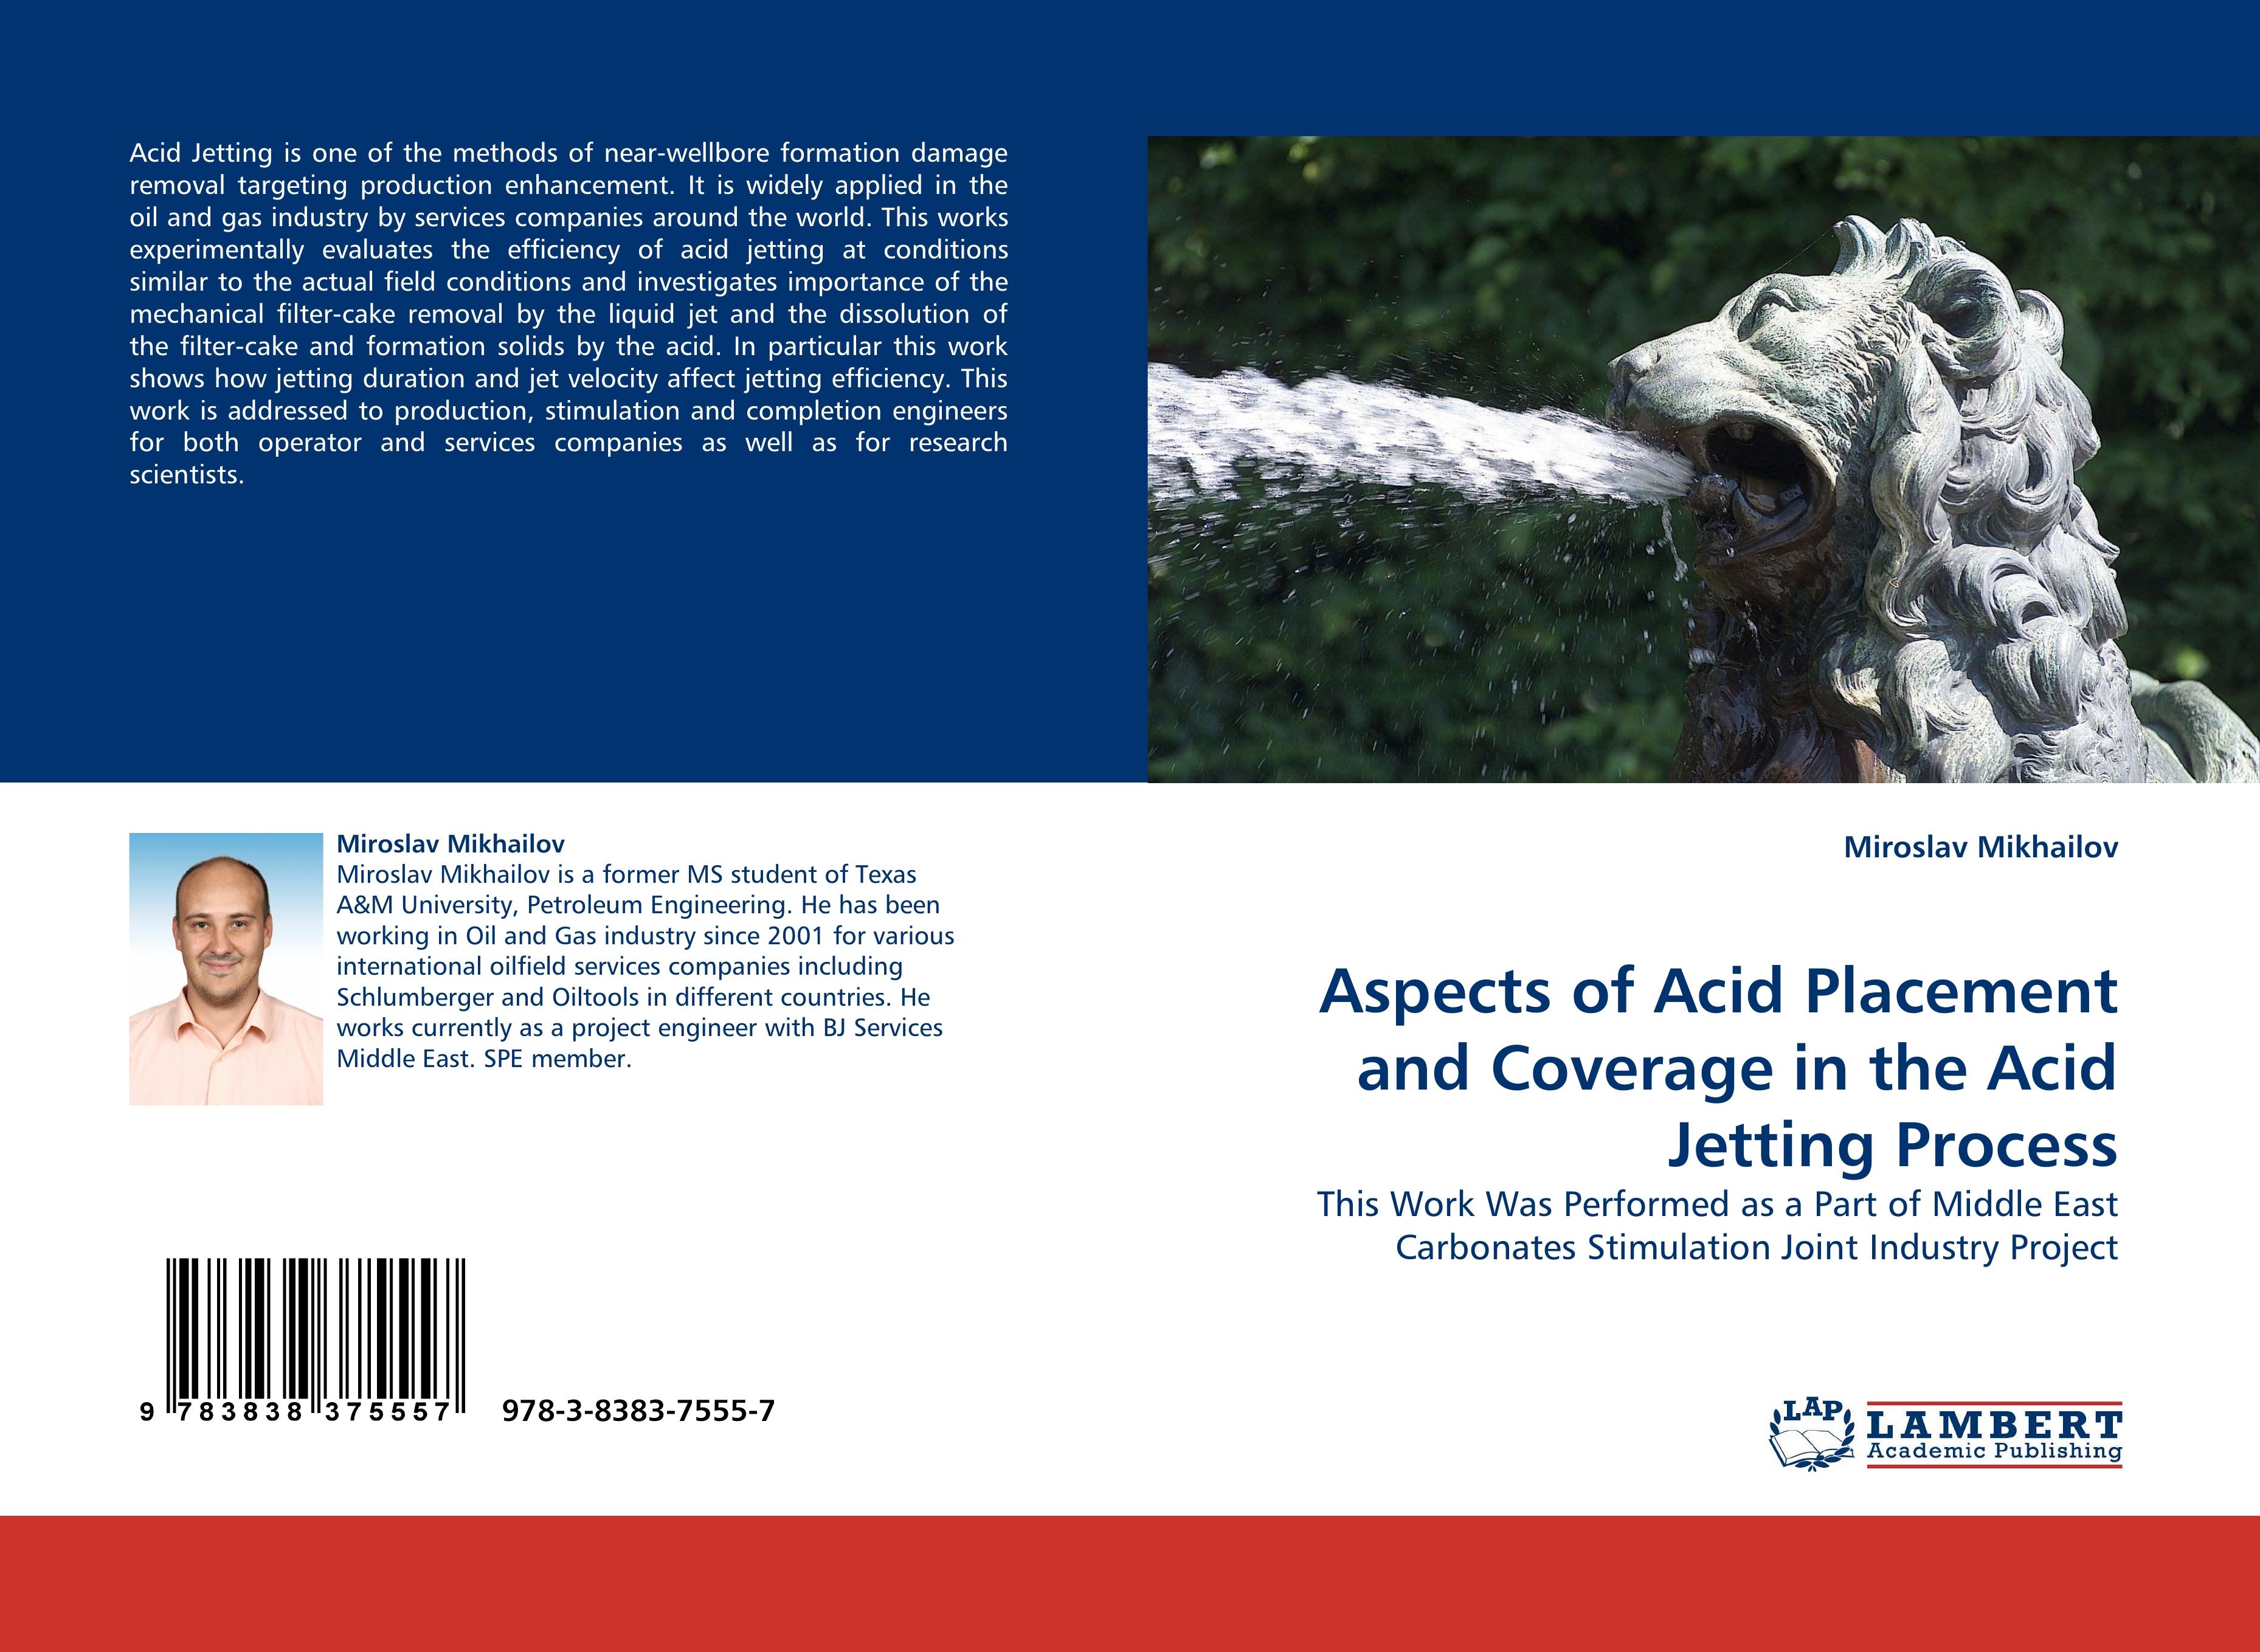 Aspects of Acid Placement and Coverage in the Acid Jetting Process - Miroslav Mikhailov